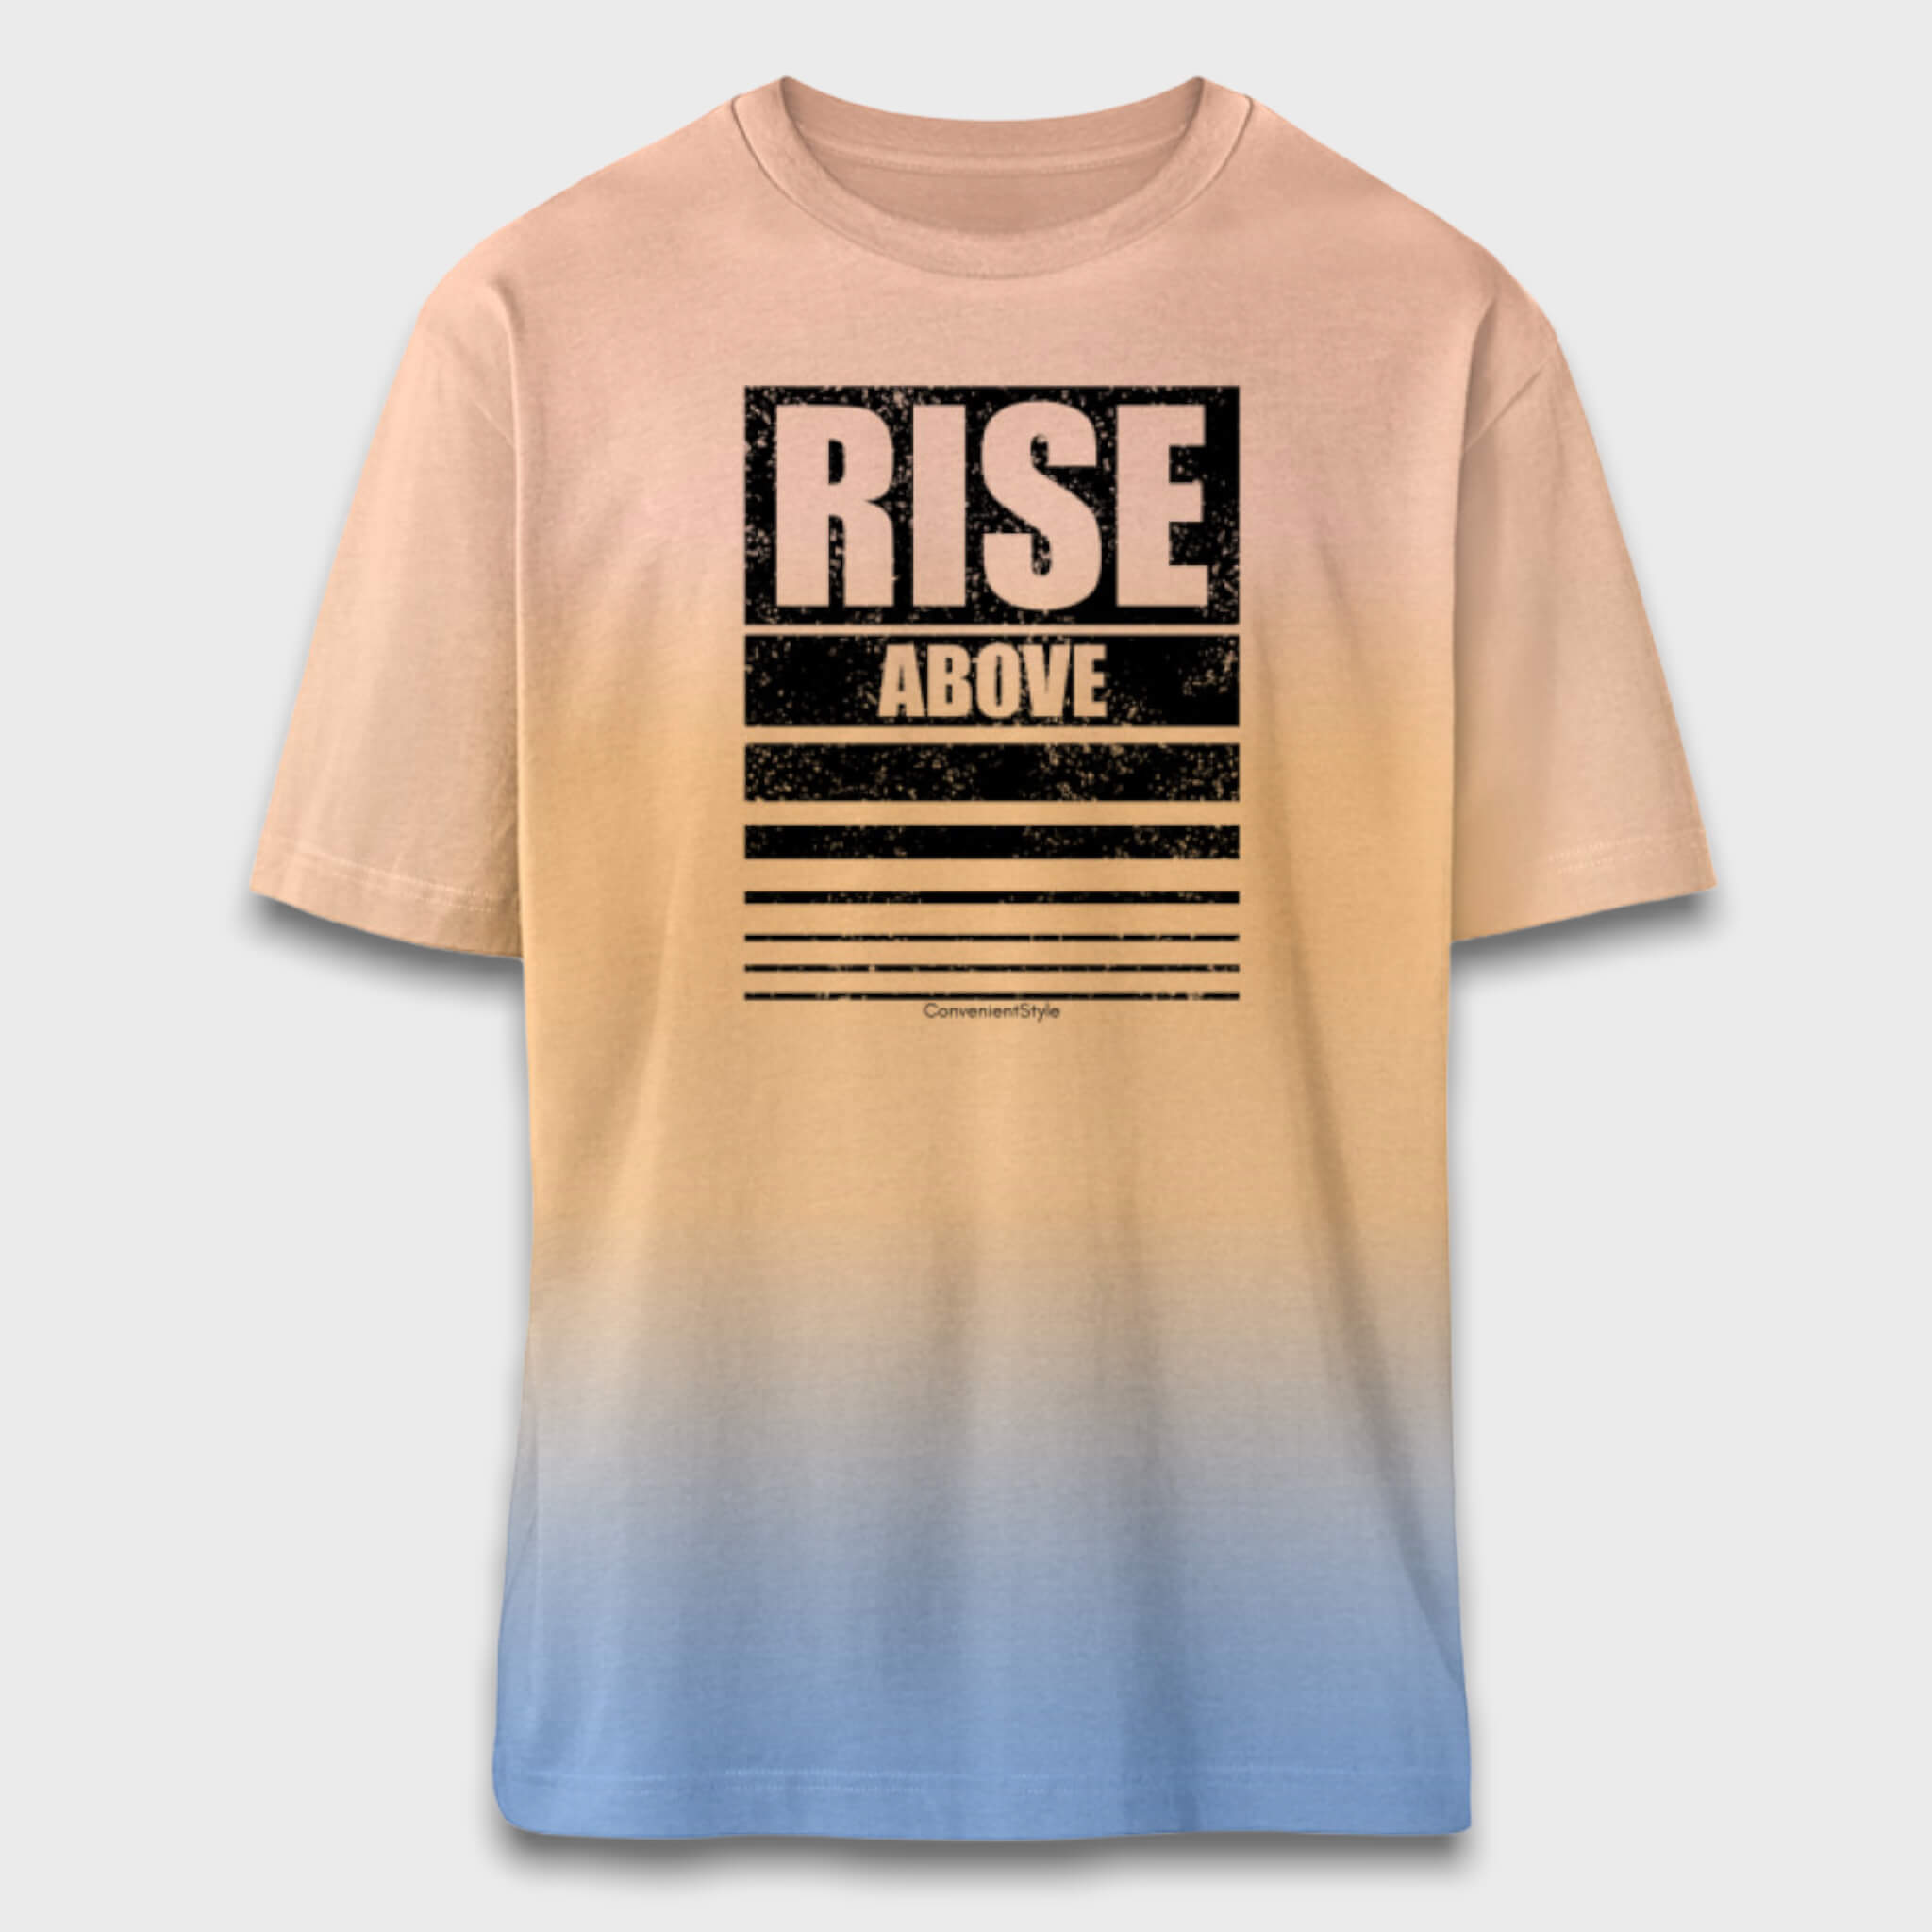 Rise above - Relaxed